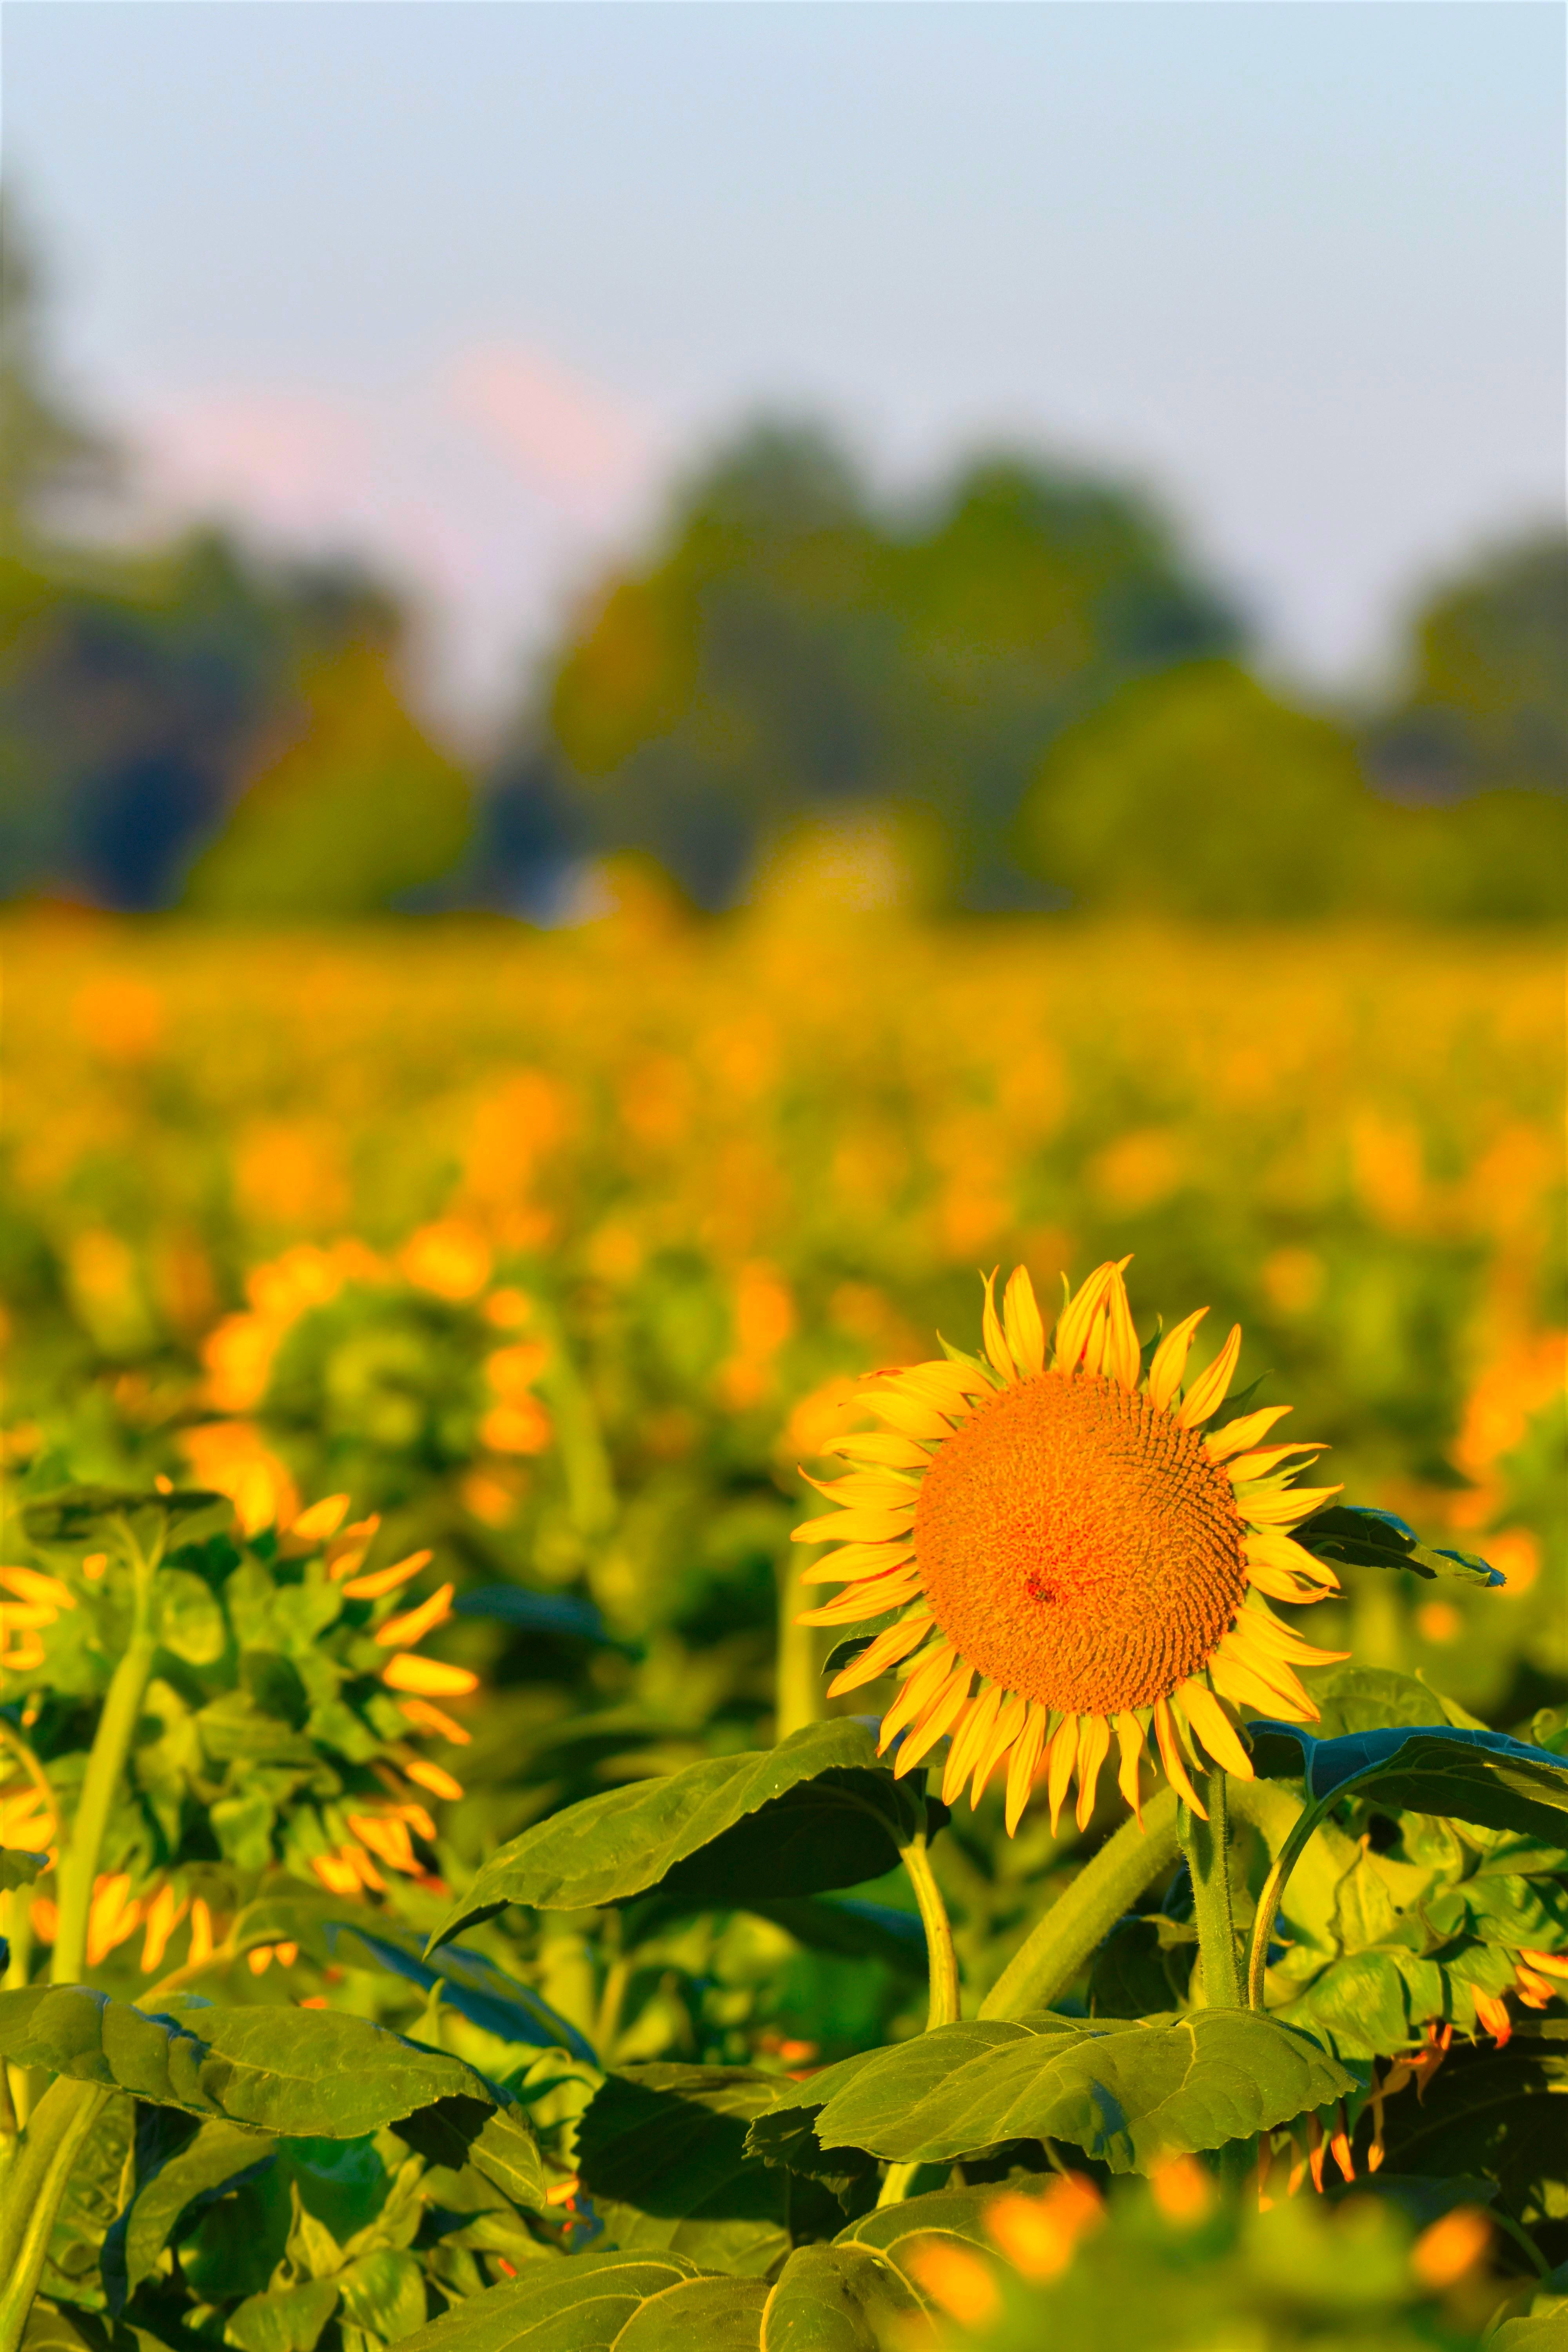 Floral Design Studio captures the essence of nature's beauty, showcasing a vibrant sunflower in a vast field against a backdrop of trees and a clear sky.